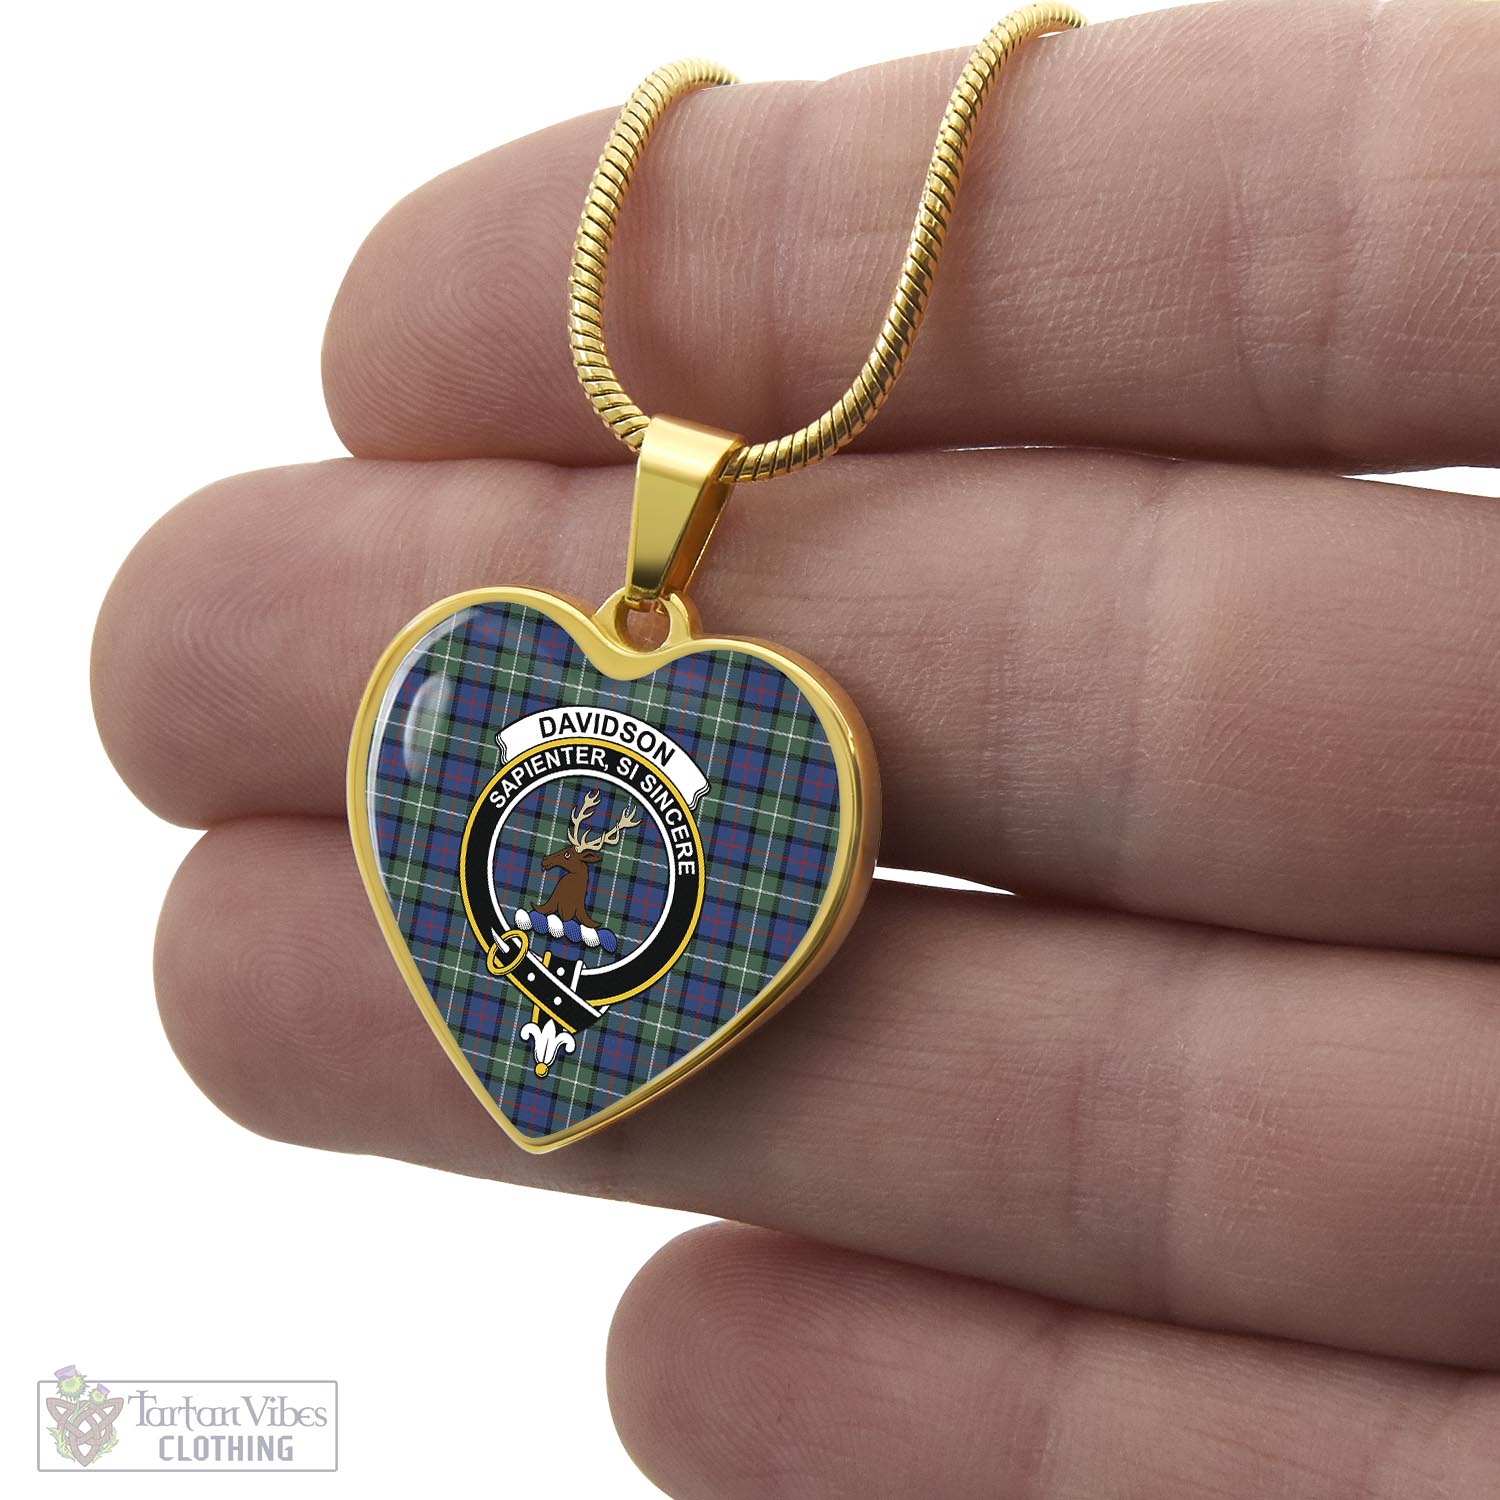 Tartan Vibes Clothing Davidson of Tulloch Tartan Heart Necklace with Family Crest